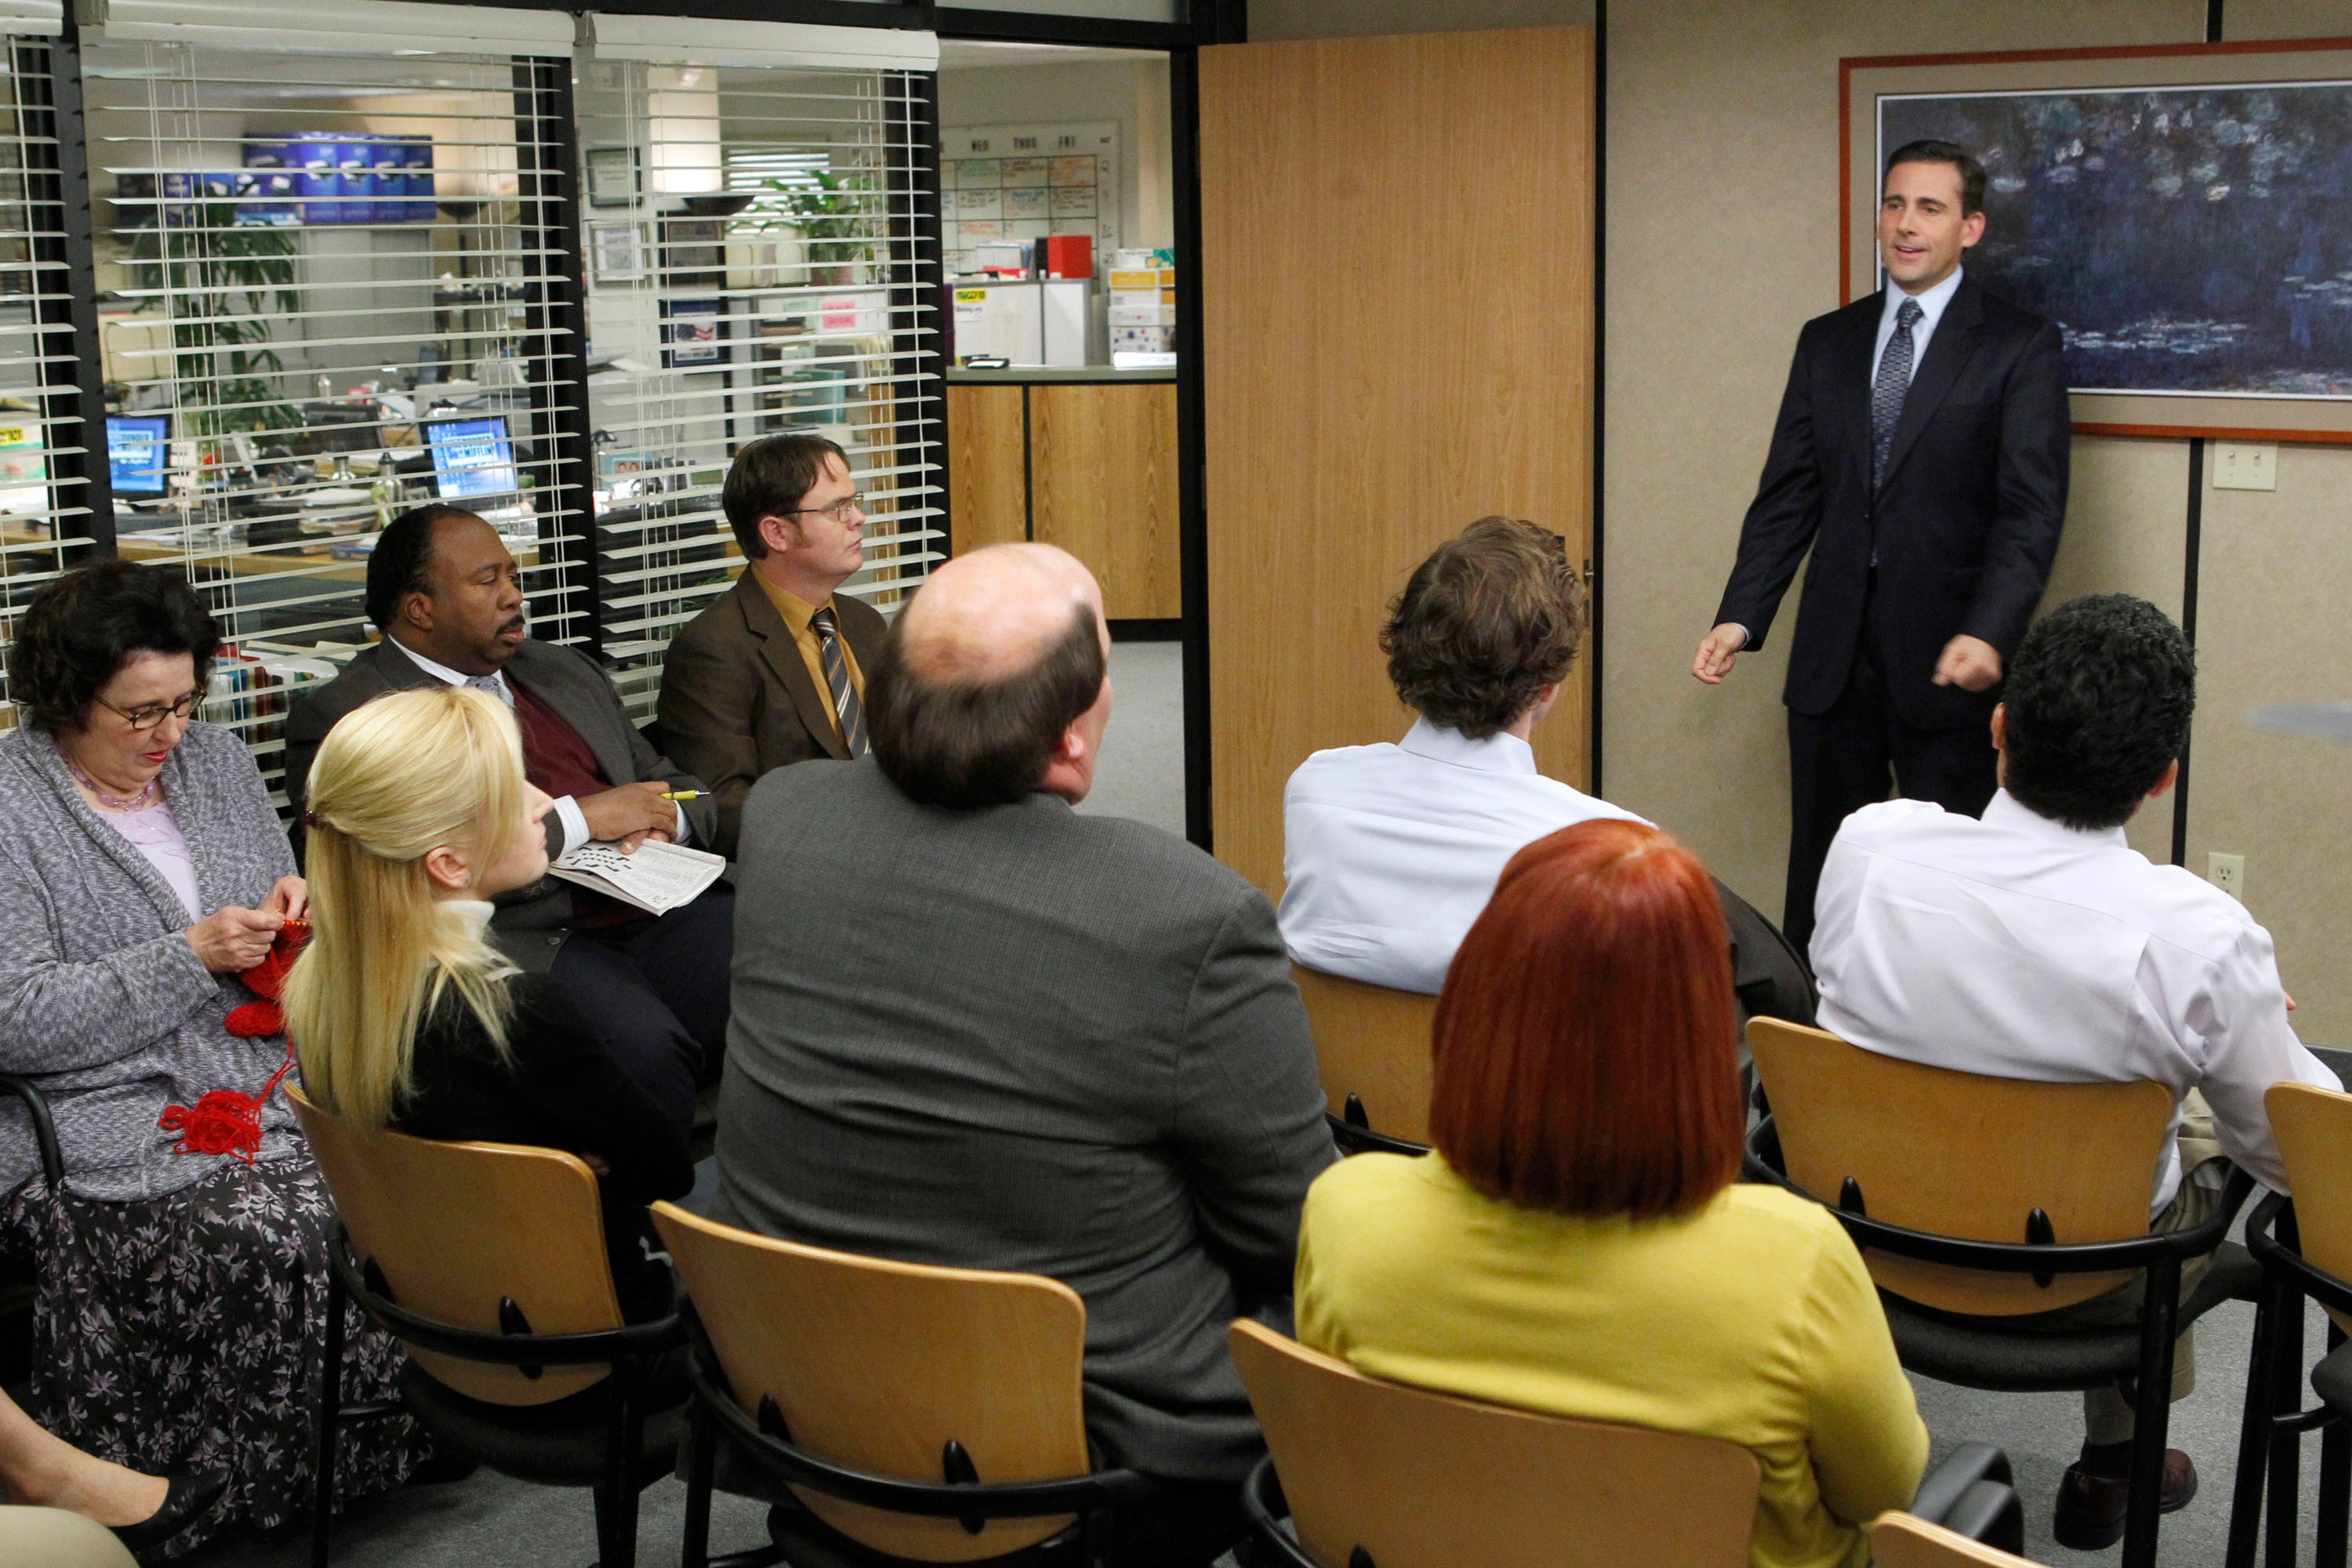 'The Office' cast filming a scene in the conference room